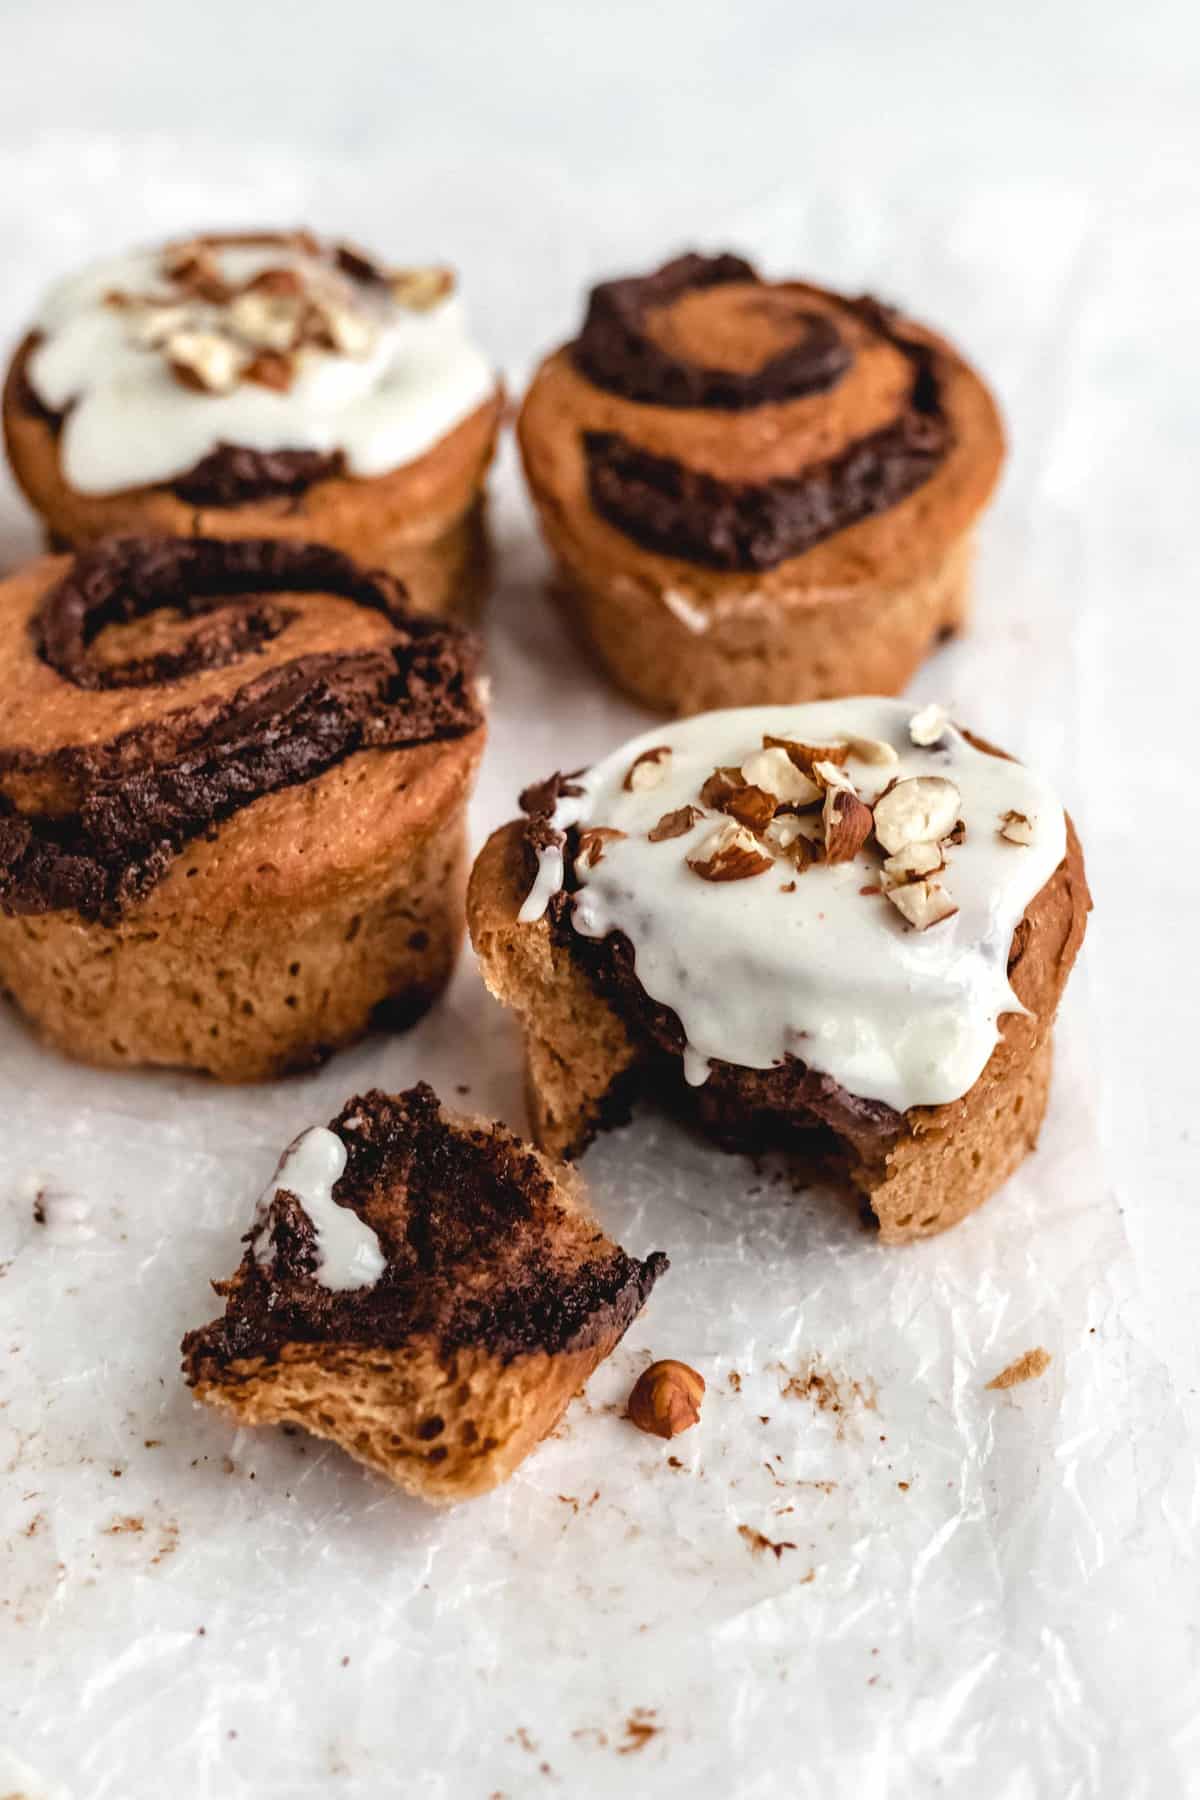 The best ever Chocolate Hazelnut Rolls - soft and delicious chocolate rolls filled with creamy chocolate hazelnut spread and topped with cream cheese icing.